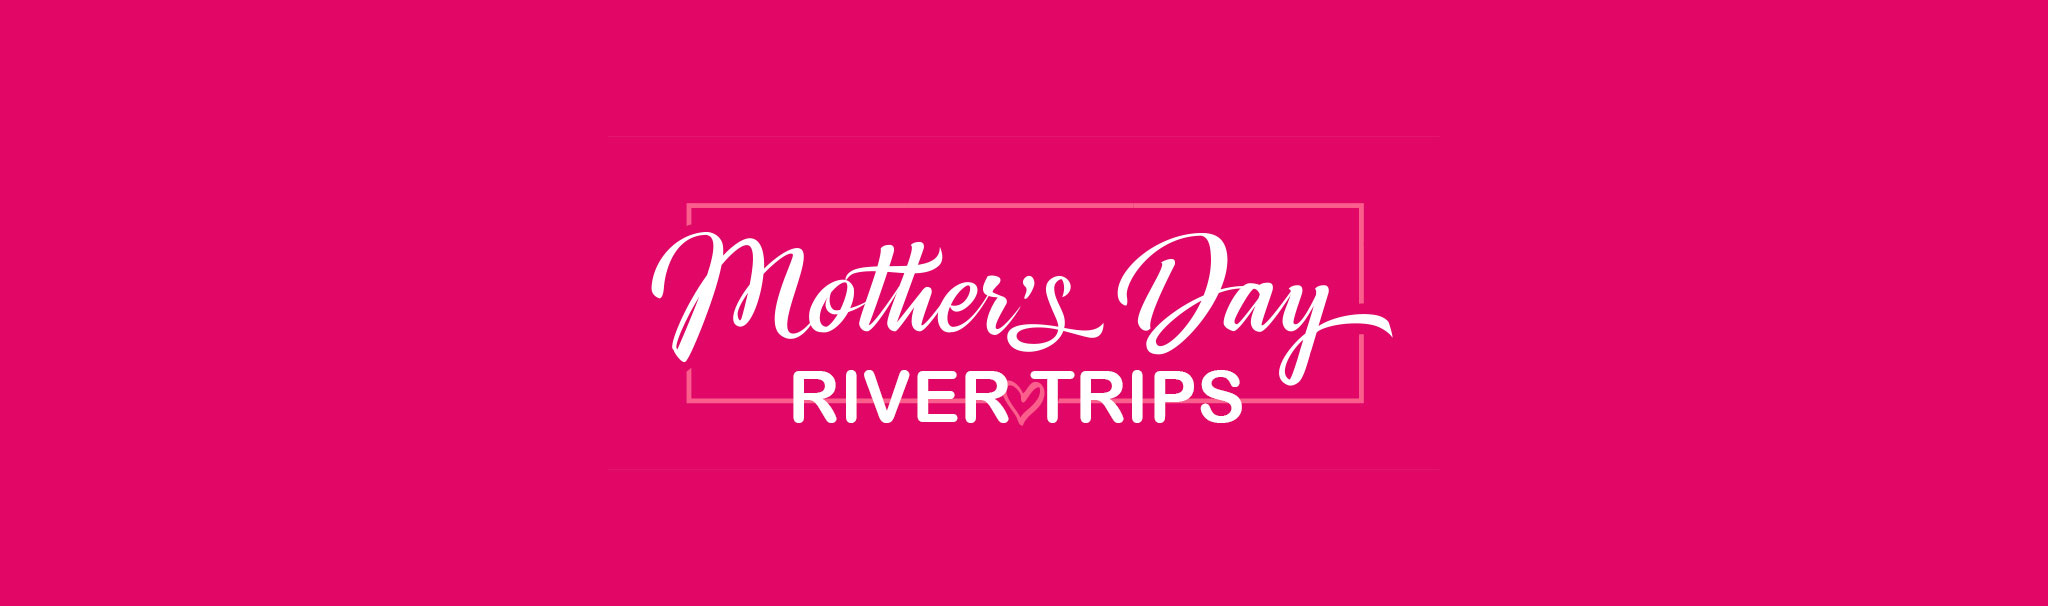 Mother's Day River Trips